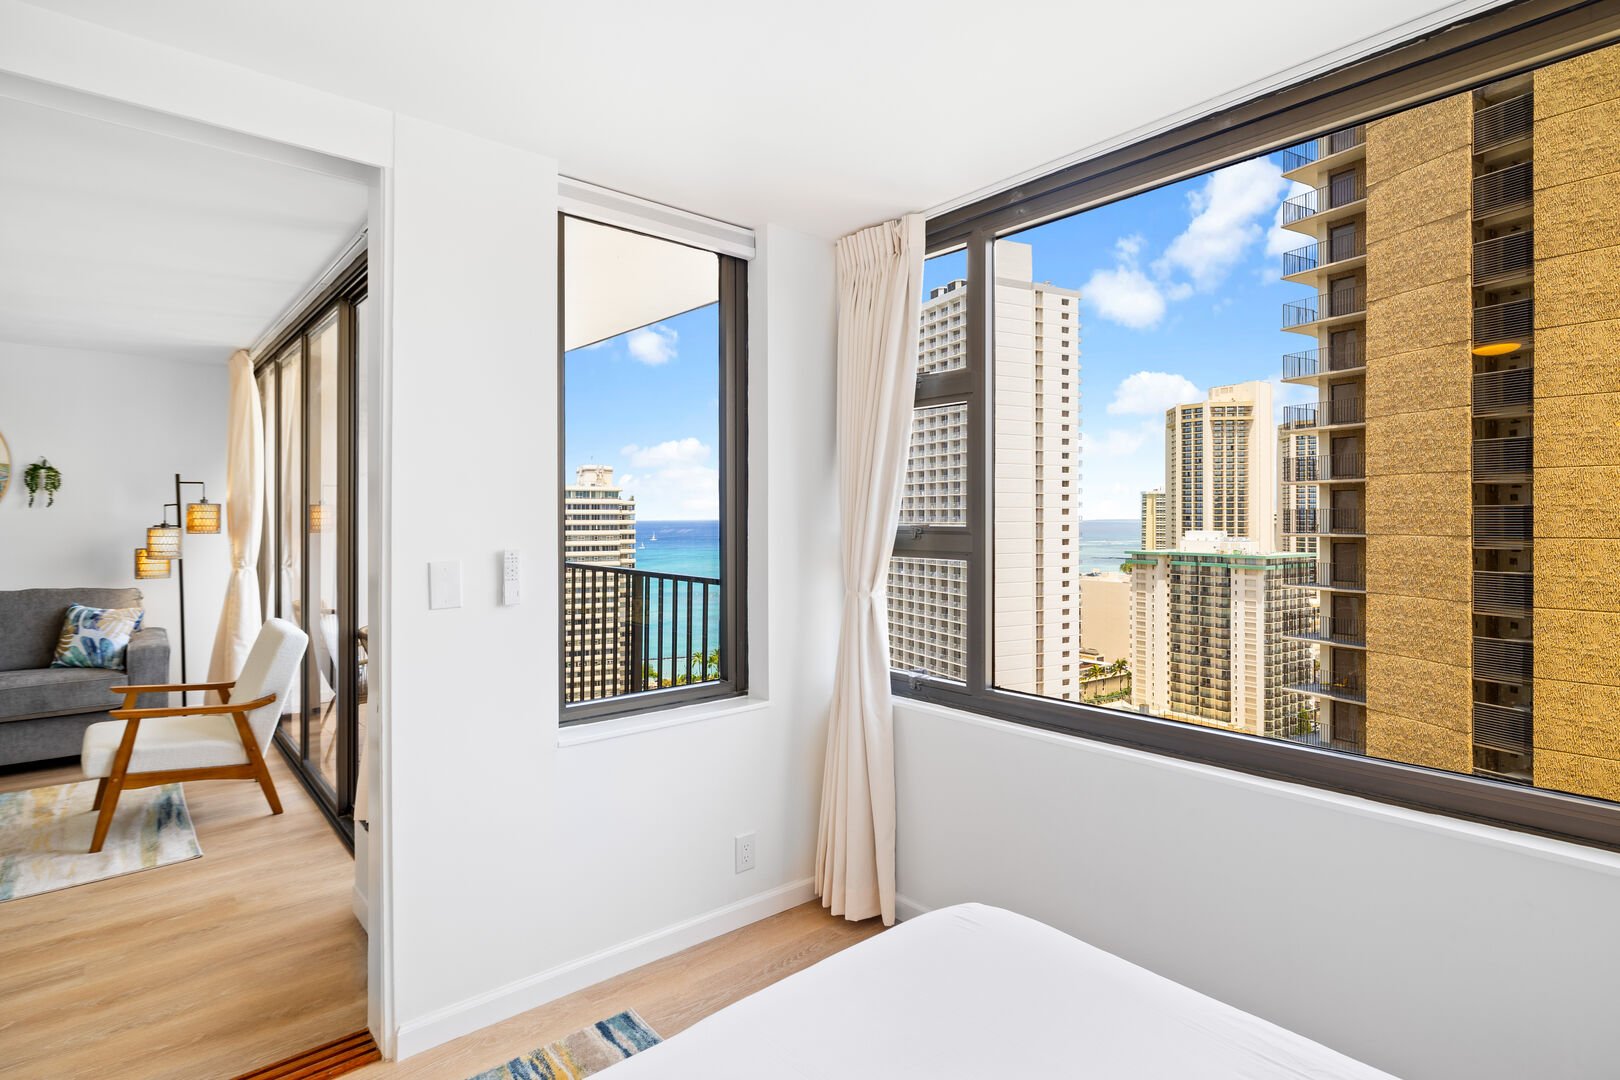 Look at that stunning ocean views from the bedroom!